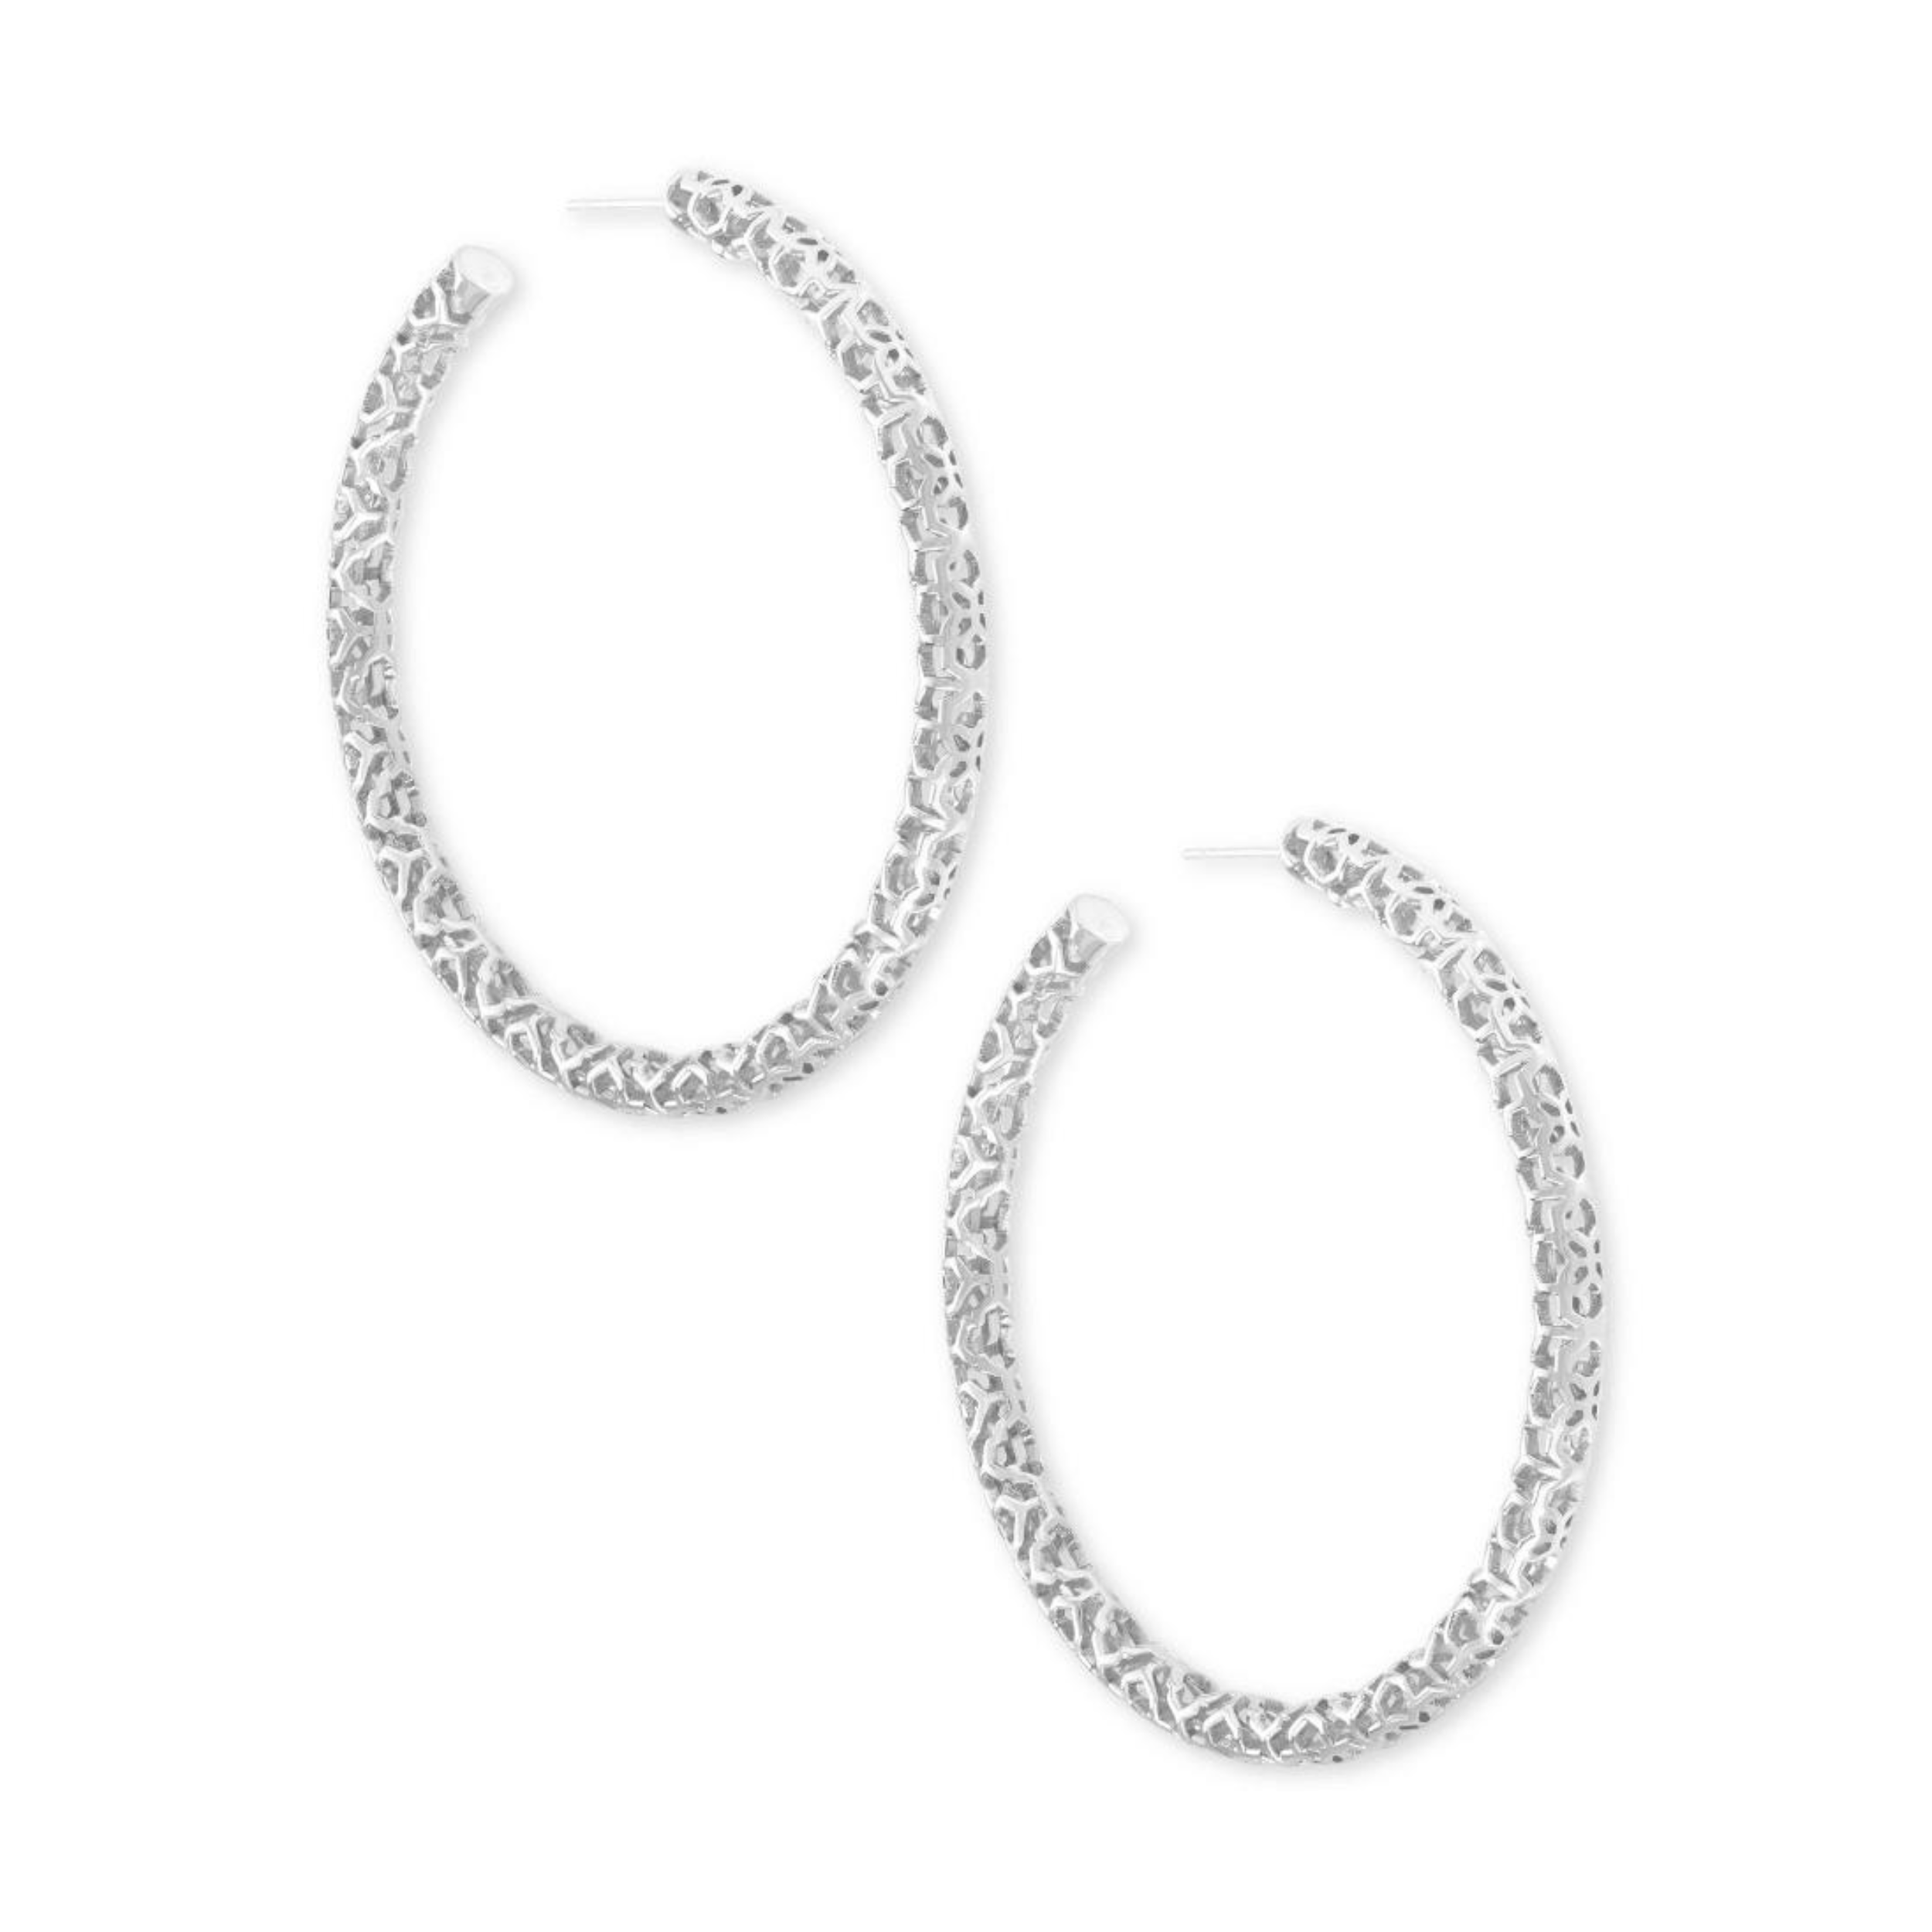 Large silver hoop earrings with filigree detailing, pictured on a white background.